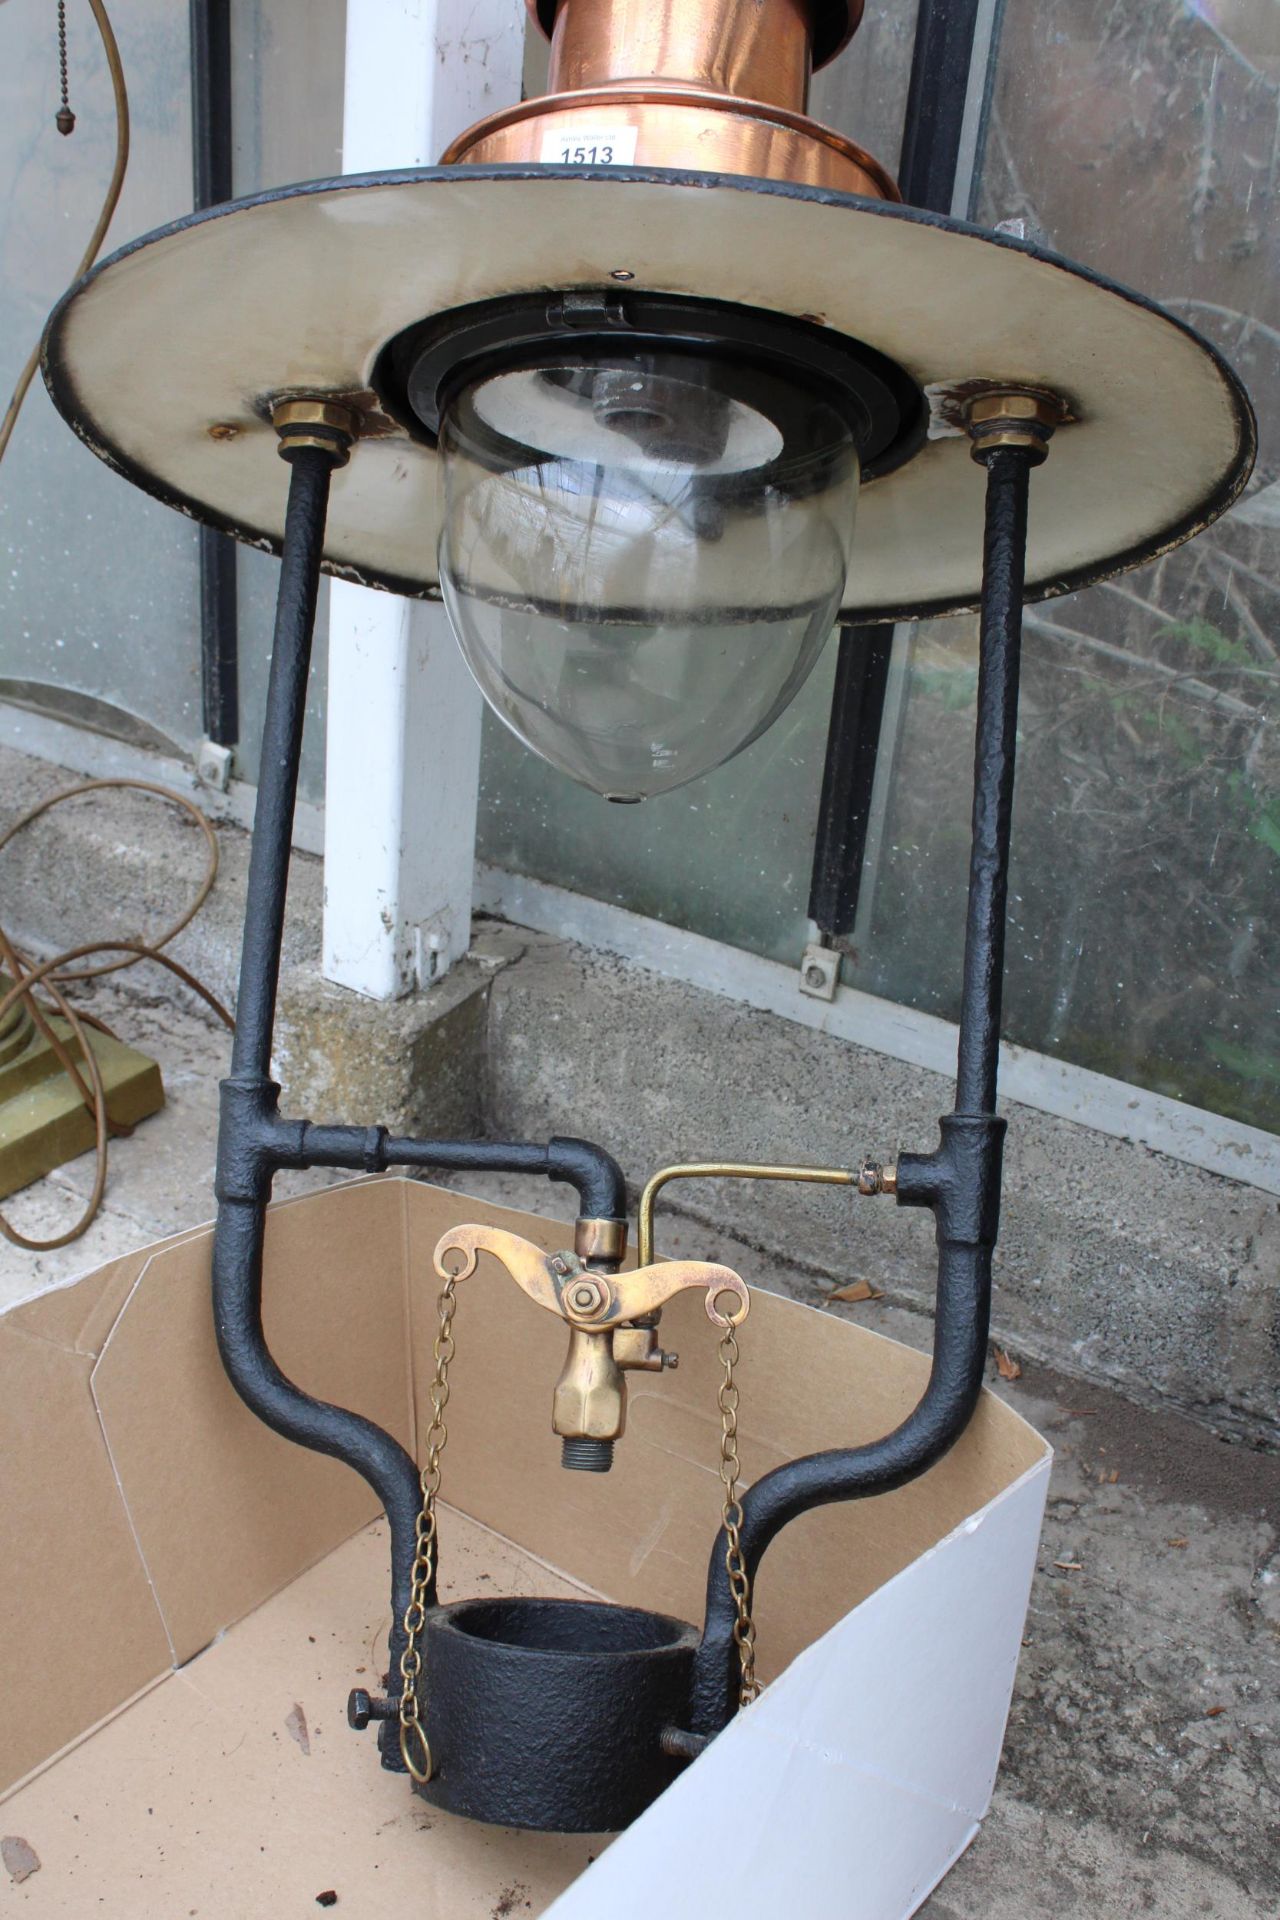 A LARGE VINTAGE COPPER AND CAST IRON GAS POWERED LAMP POST LIGHT FITTING - Image 2 of 6